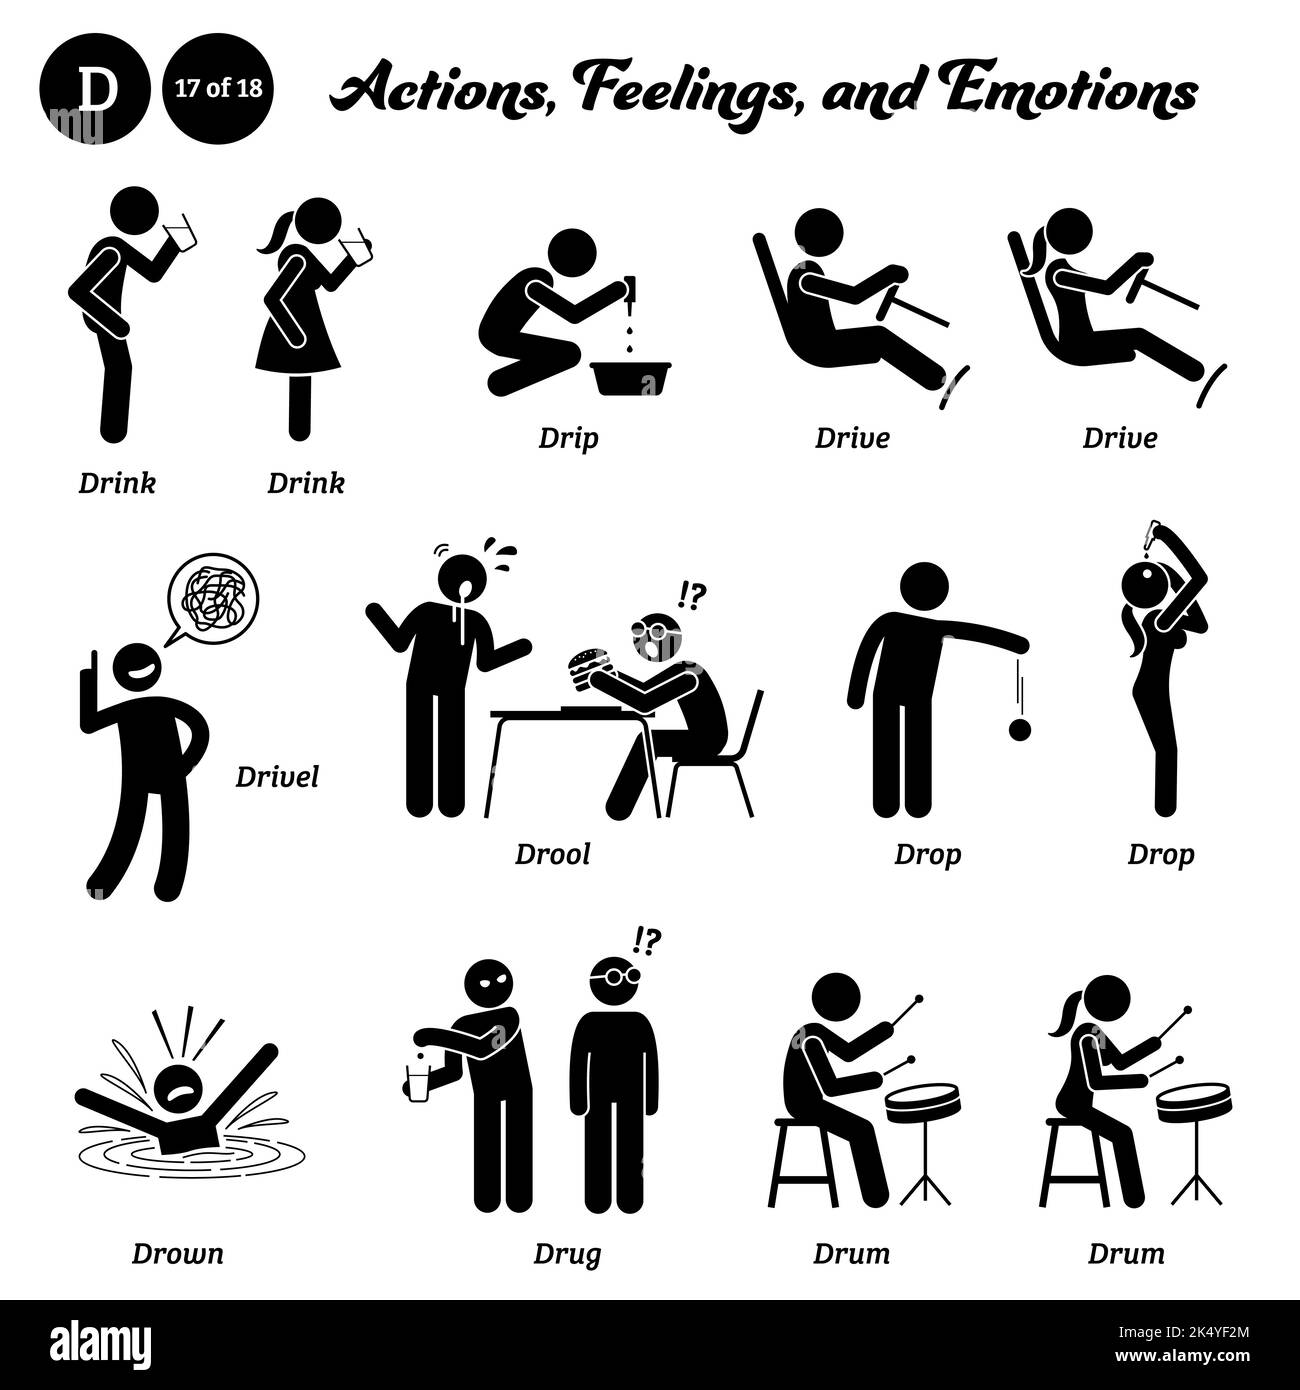 Stick figure human people man action, feelings, and emotions icons alphabet D. Drink, drip, drive, drivel, drool, drop, drown, drug, and drum. Stock Vector